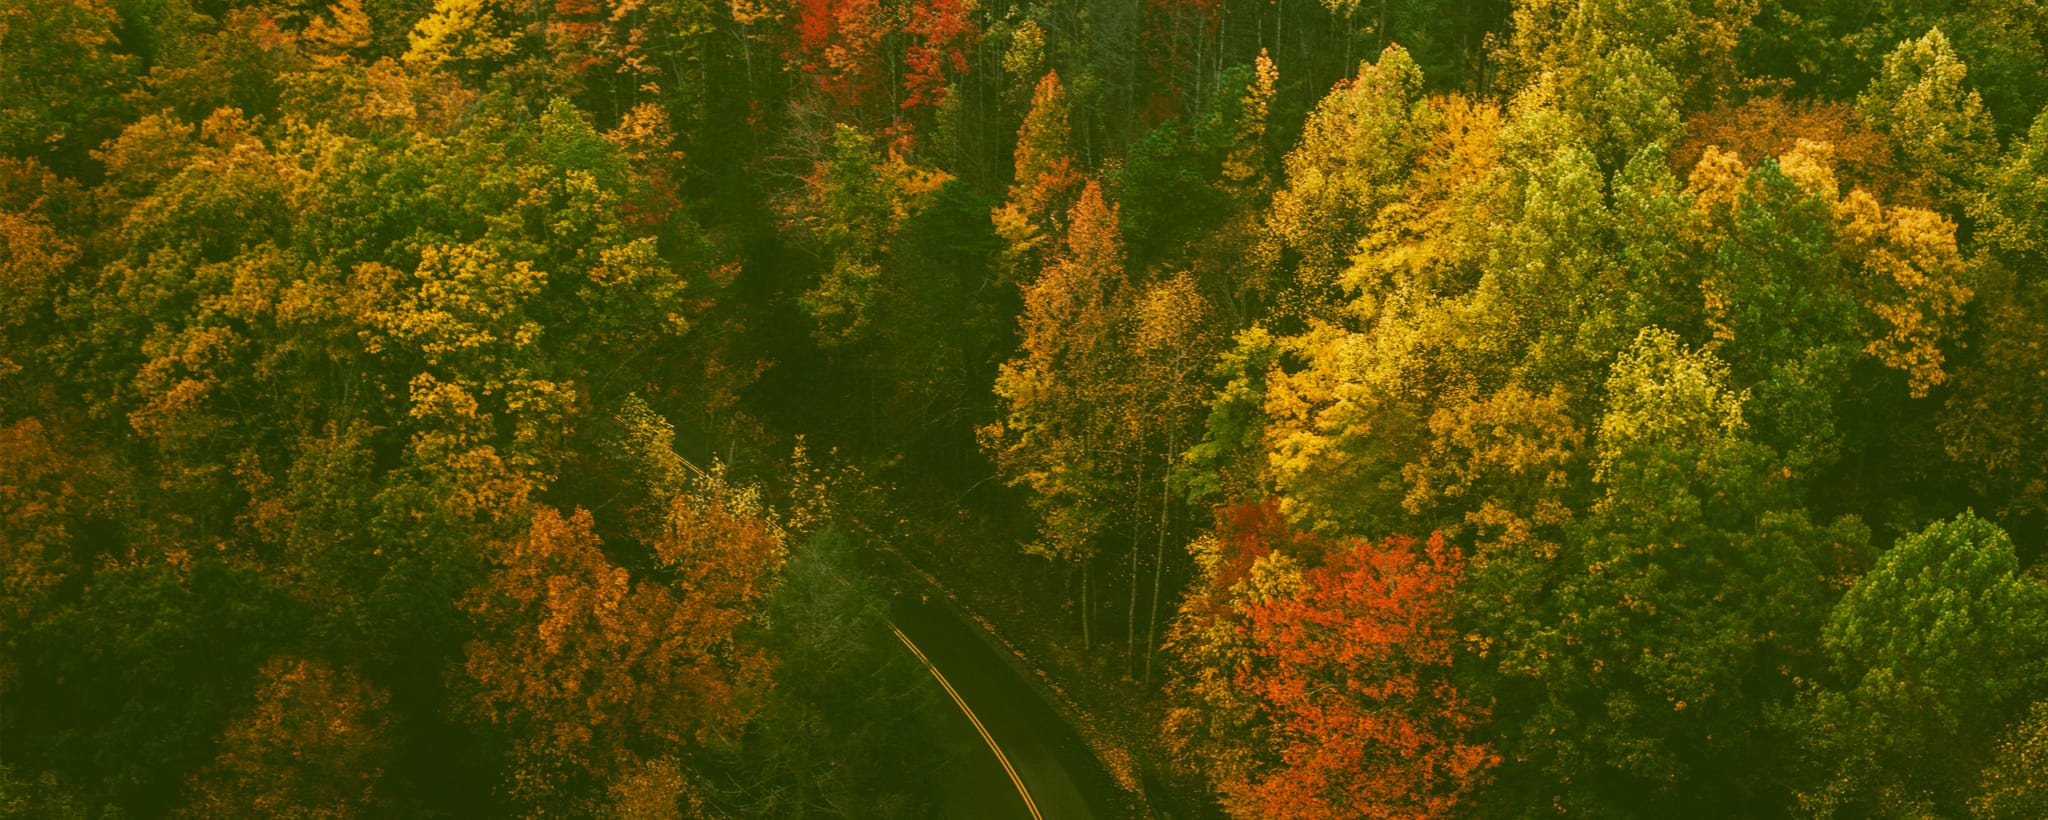 Forest with fall colors and a road